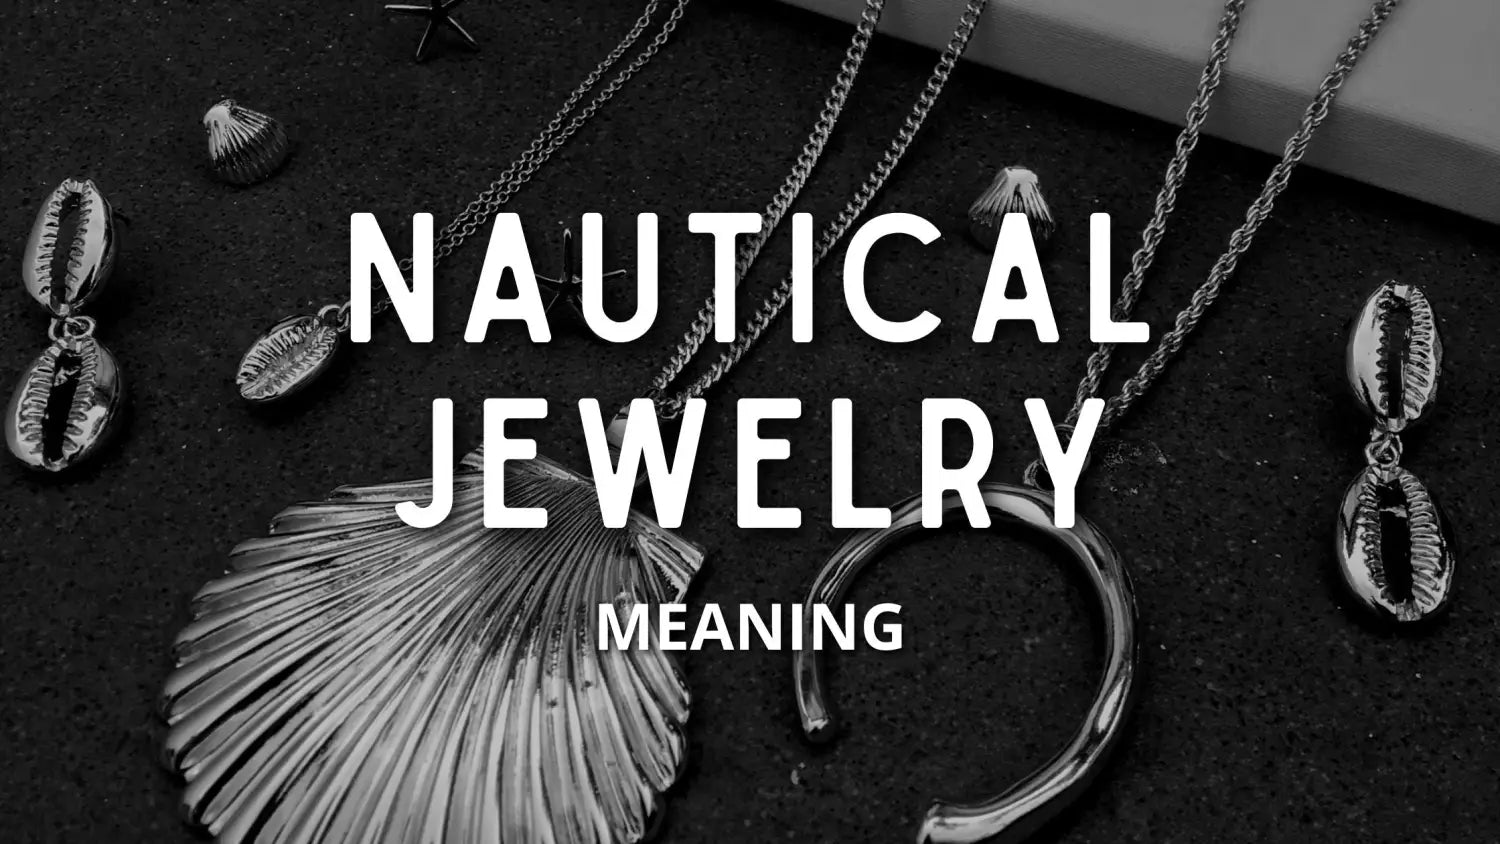 meaning-nautical-jewelry